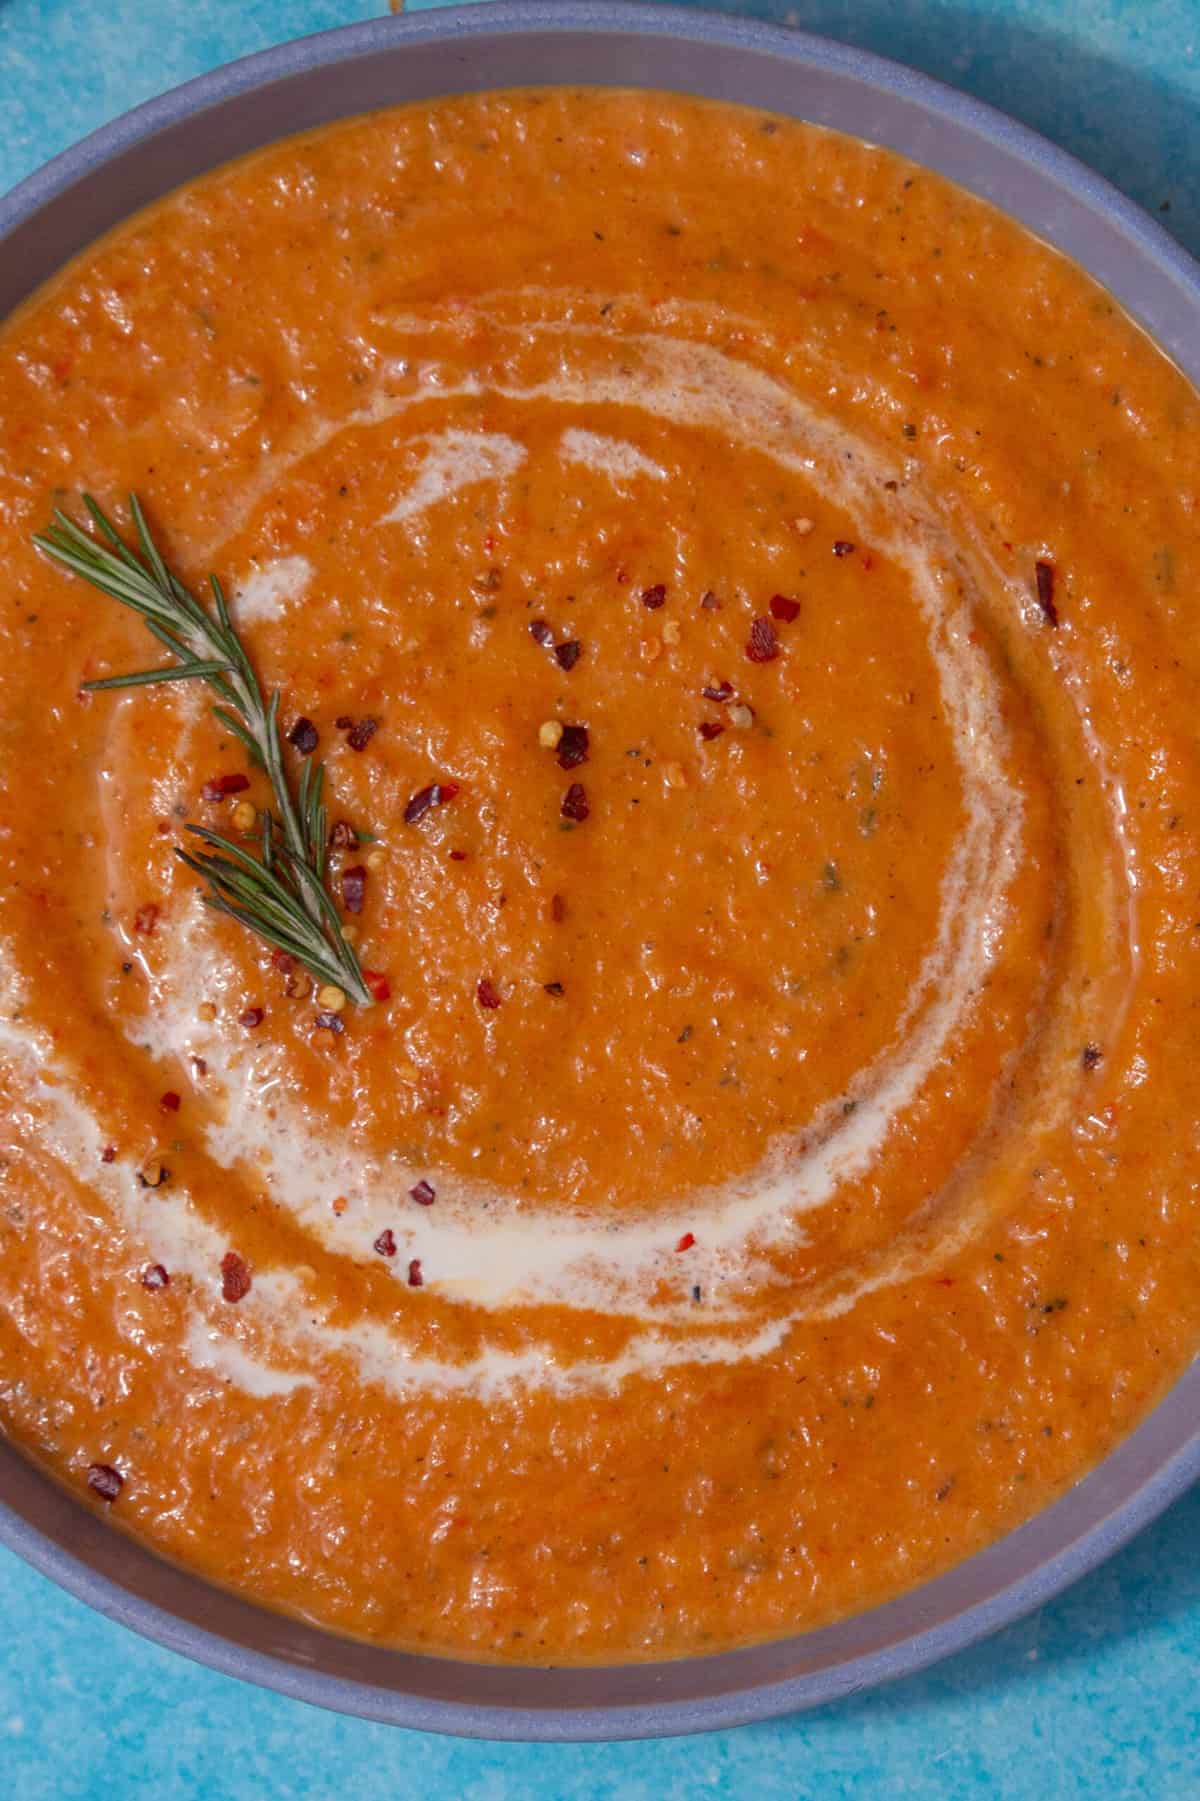 Orangey thick vegetable soup in a bowl with a swirl of cream, and topped with some chilli flakes and fresh rosemary.